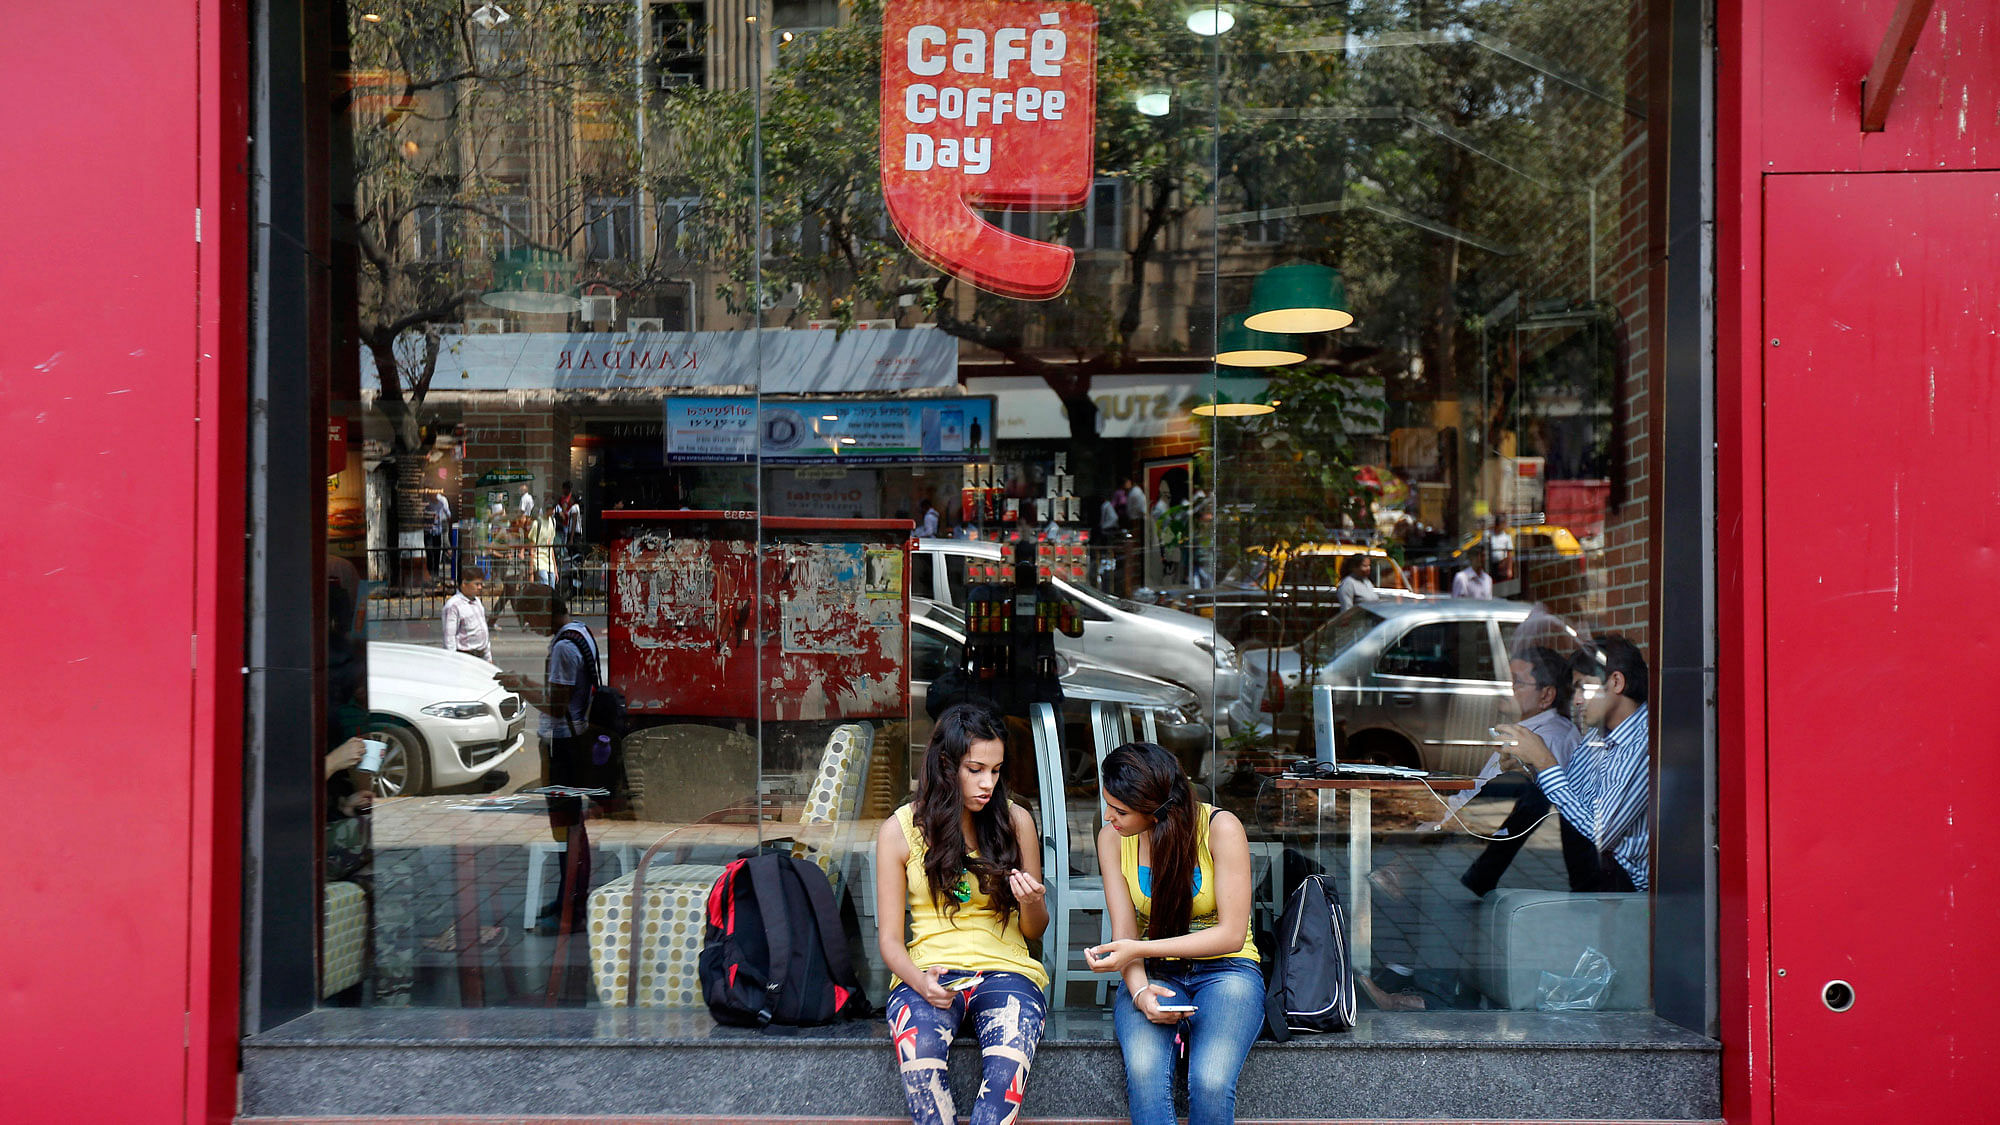 Shares of the Coffee Day listed at Rs 313 on the Bombay Stock Exchange. (Photo: Reuters)